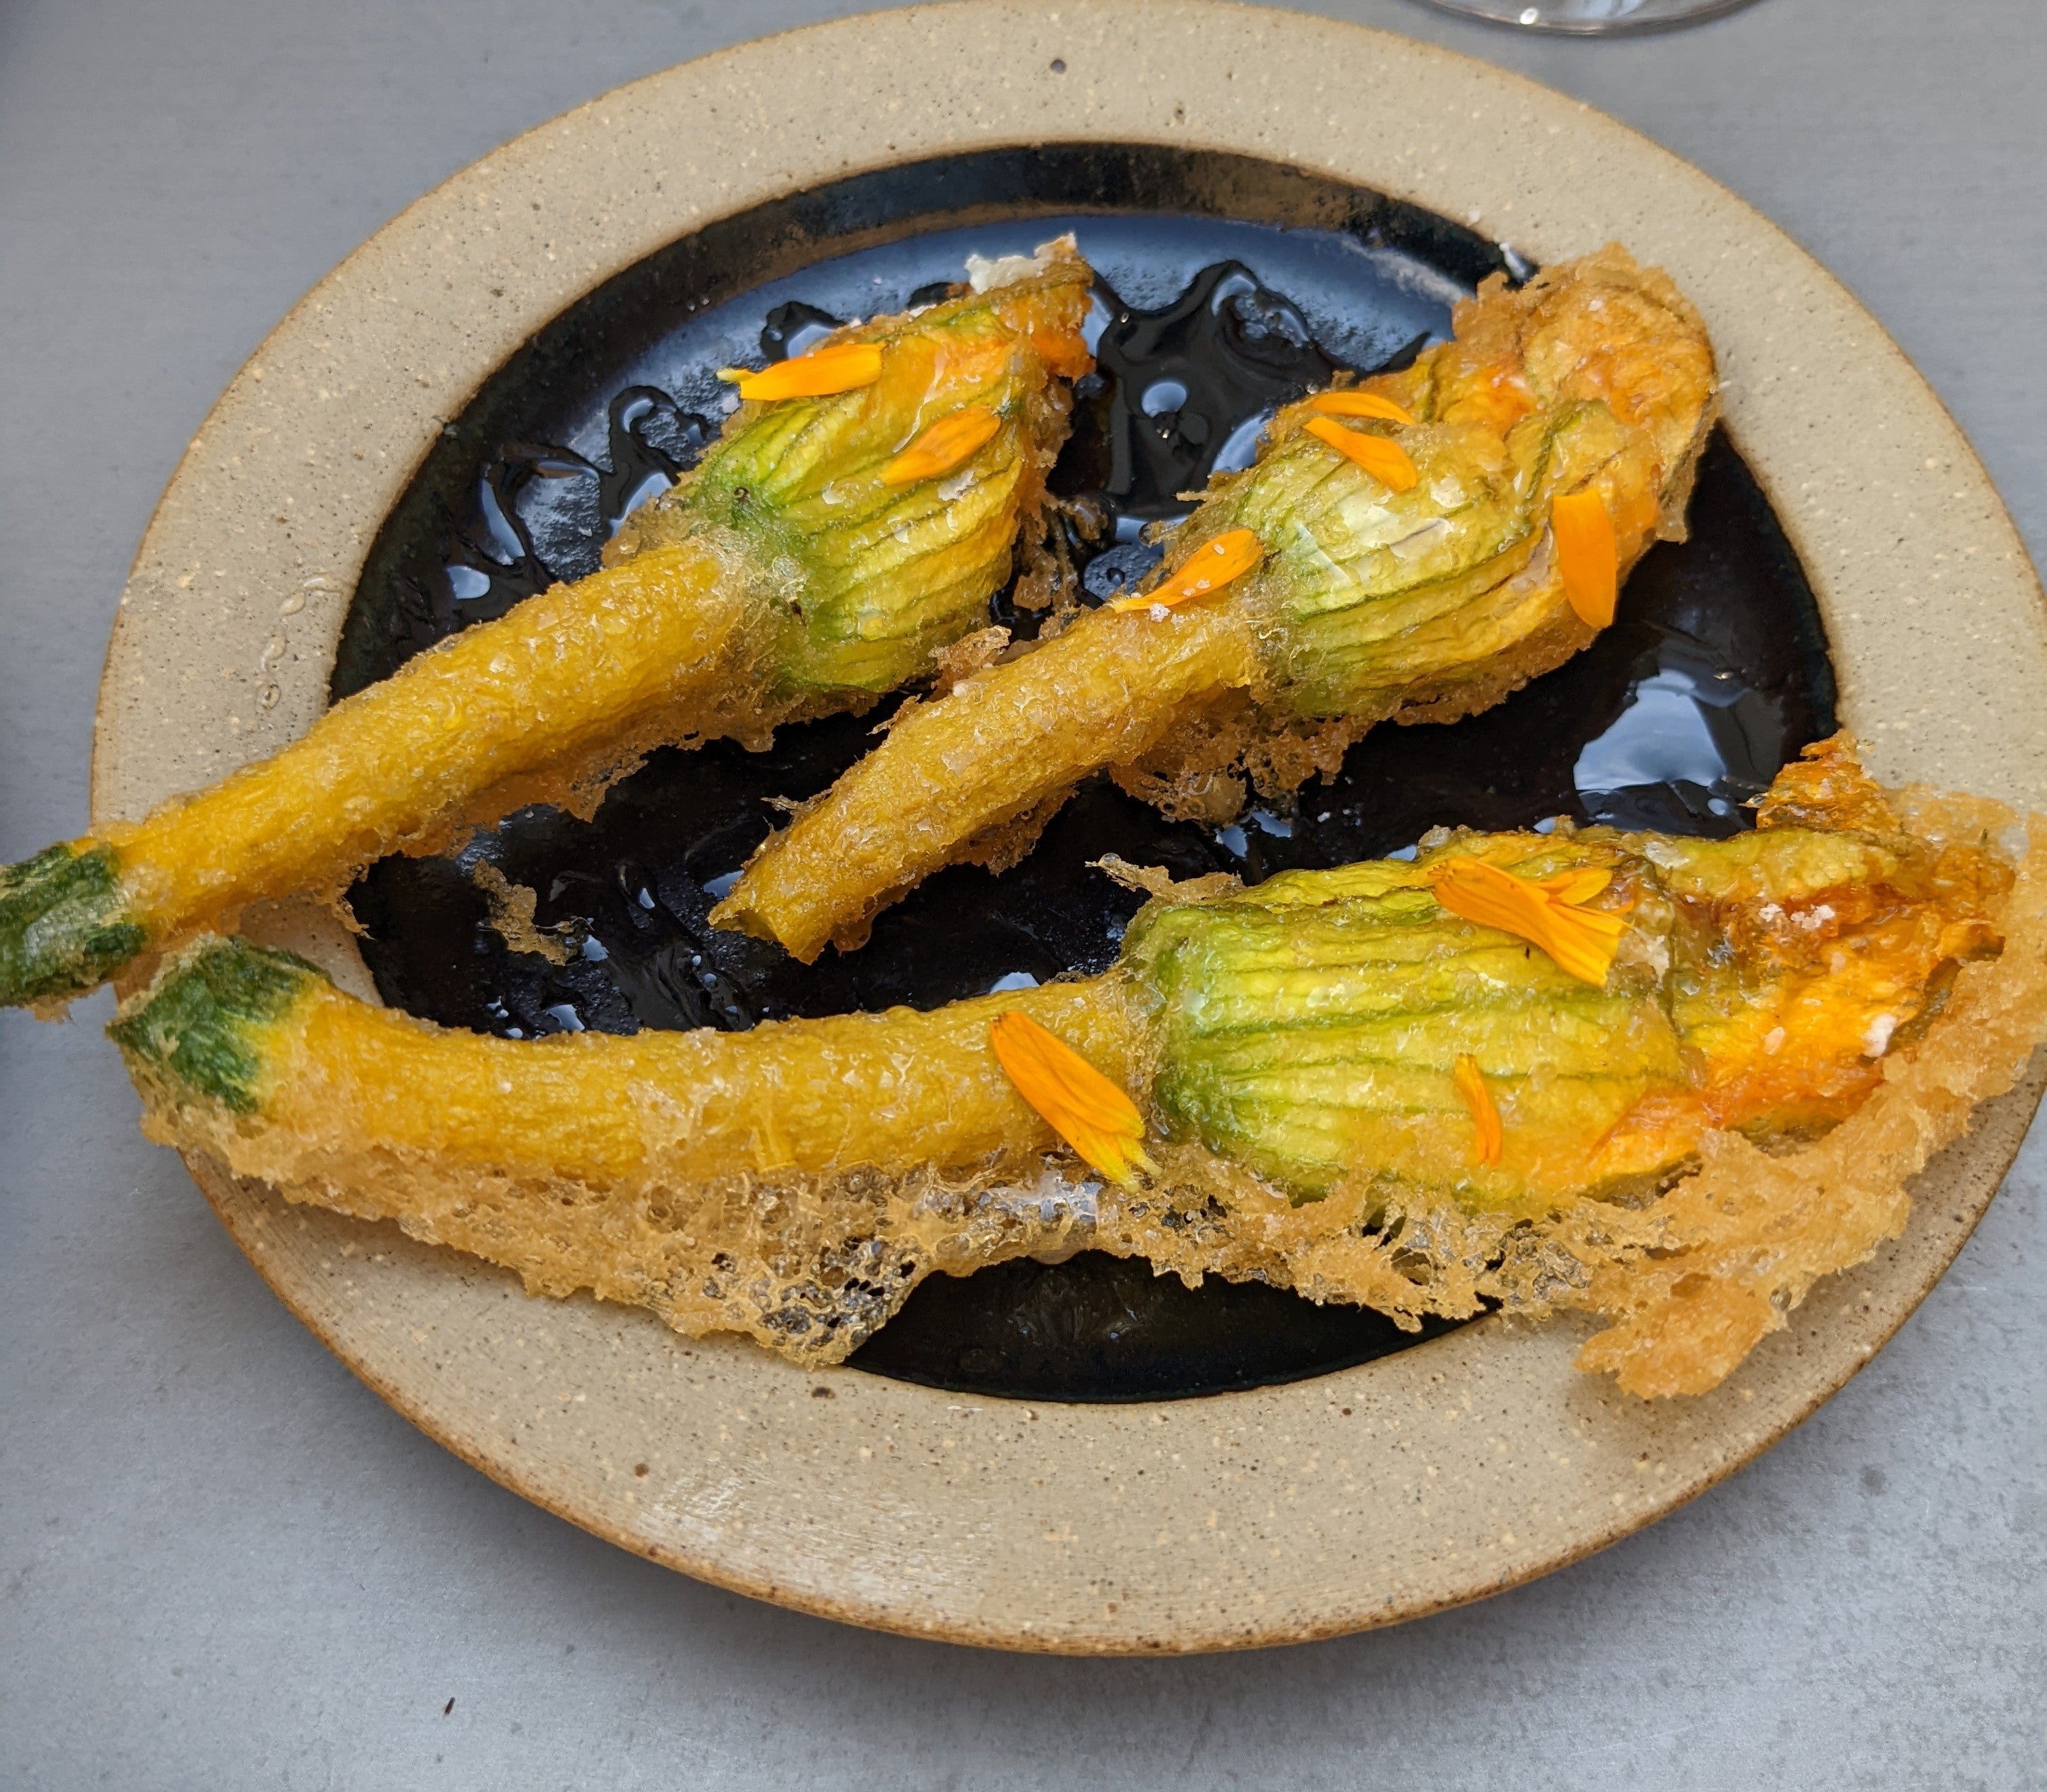 Stuffed squash flowers are delicately sweet, thanks to a drizzle of local honey